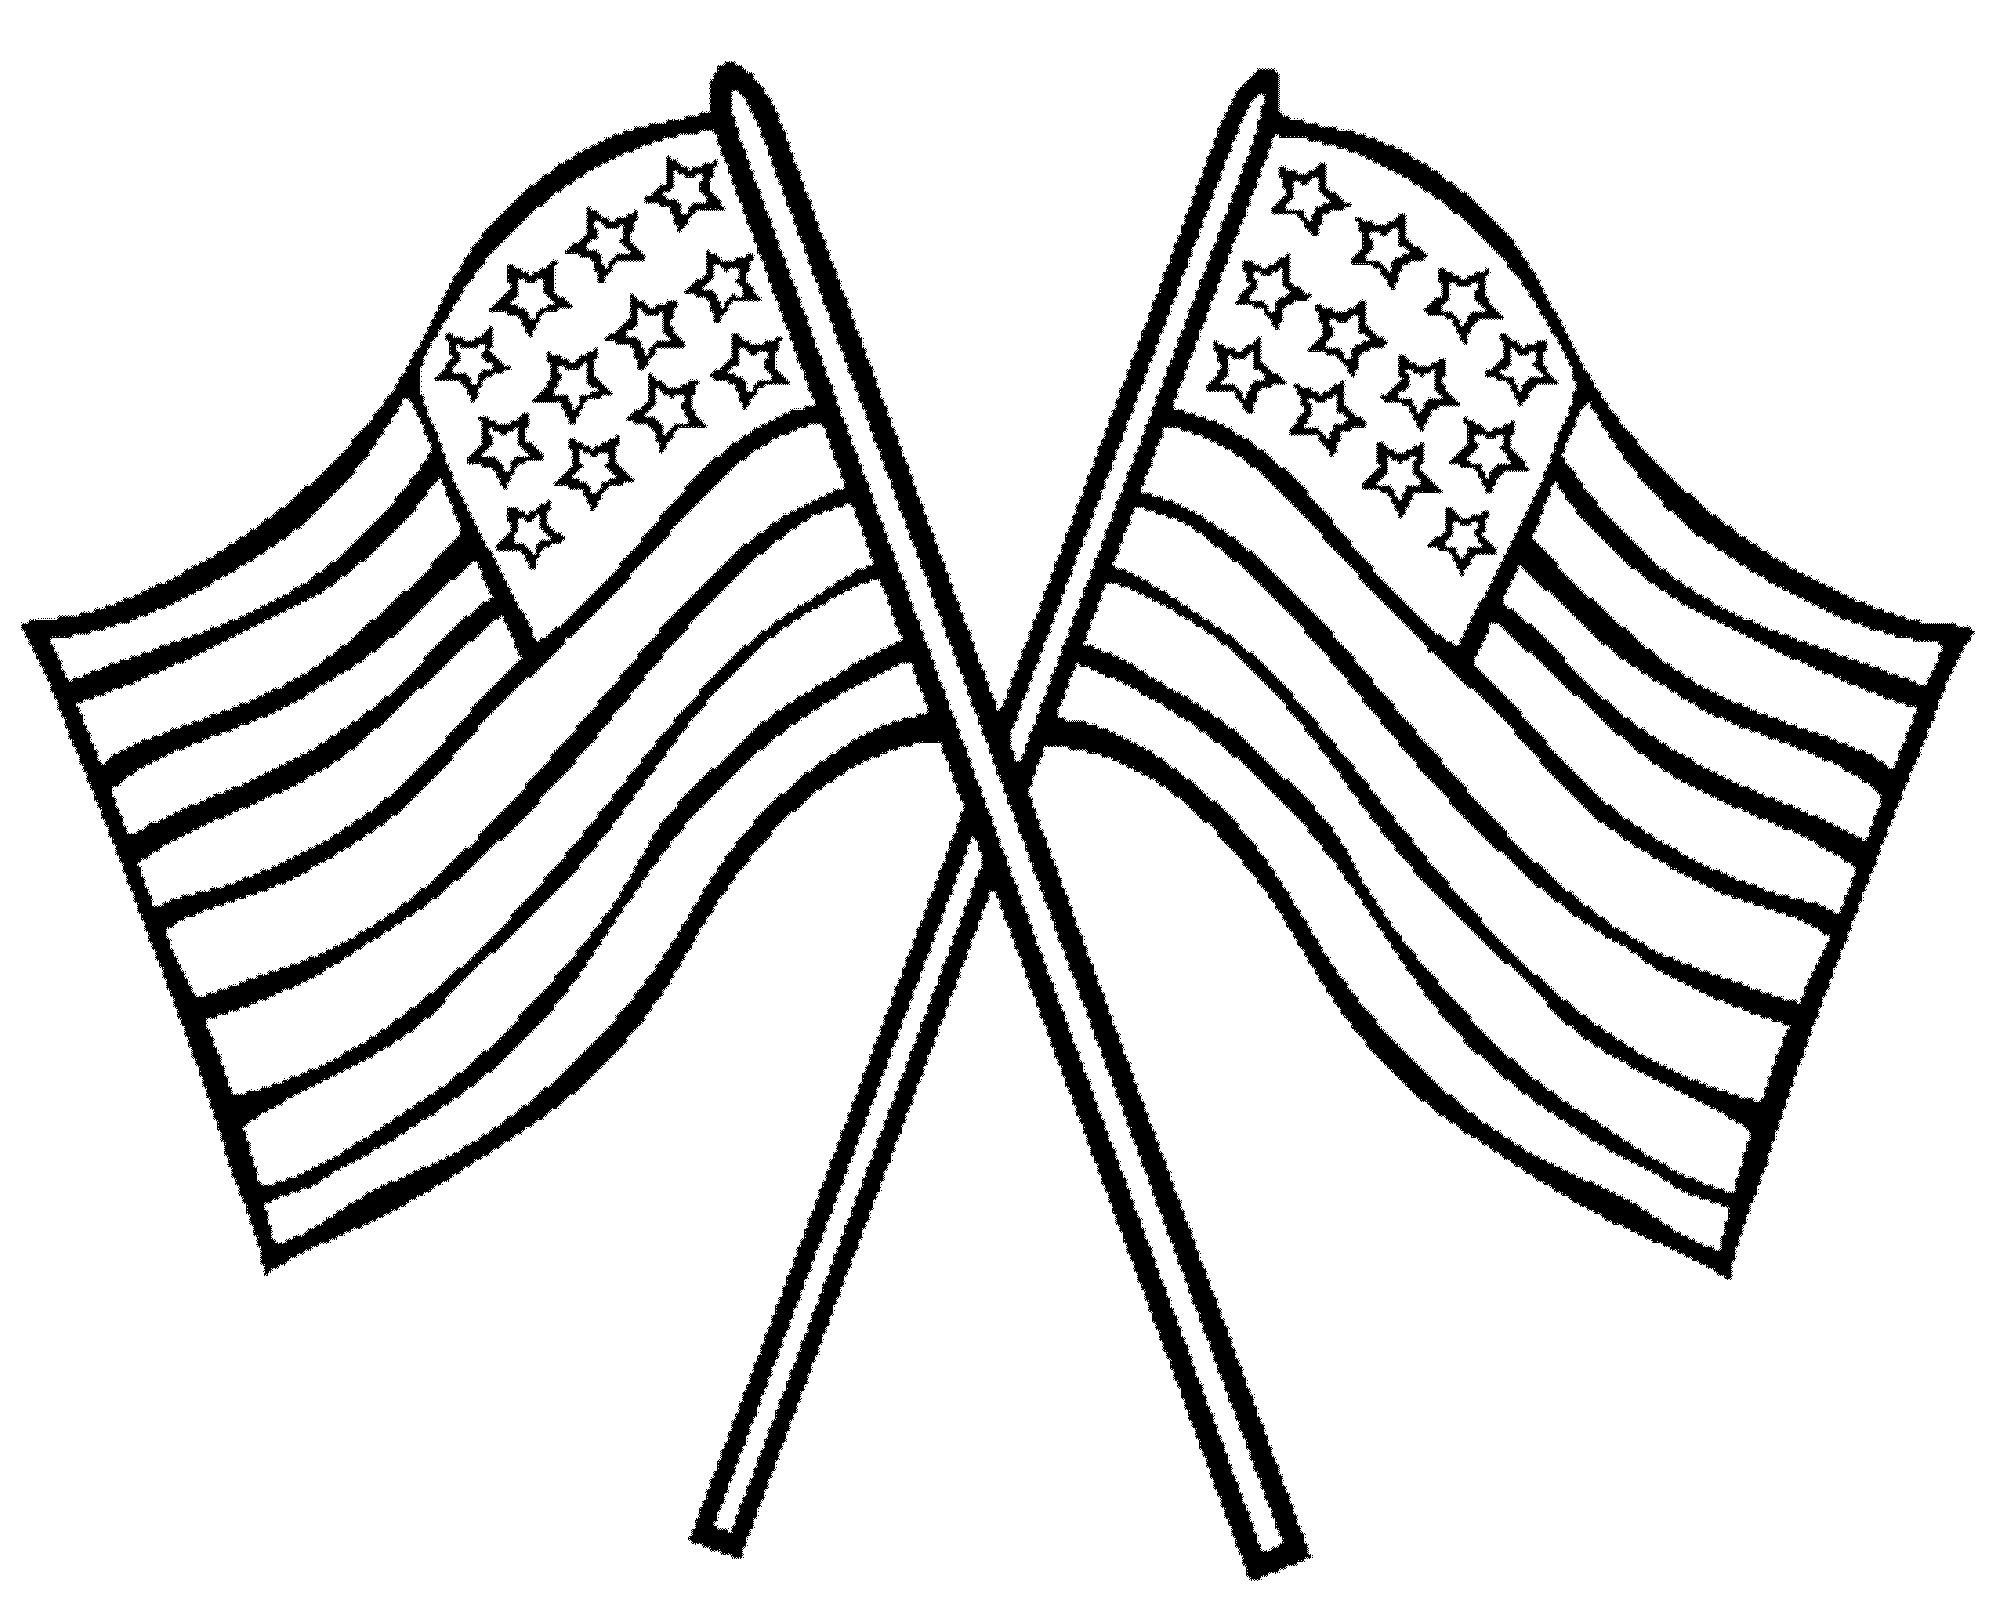 Flag Clip Art to Download 